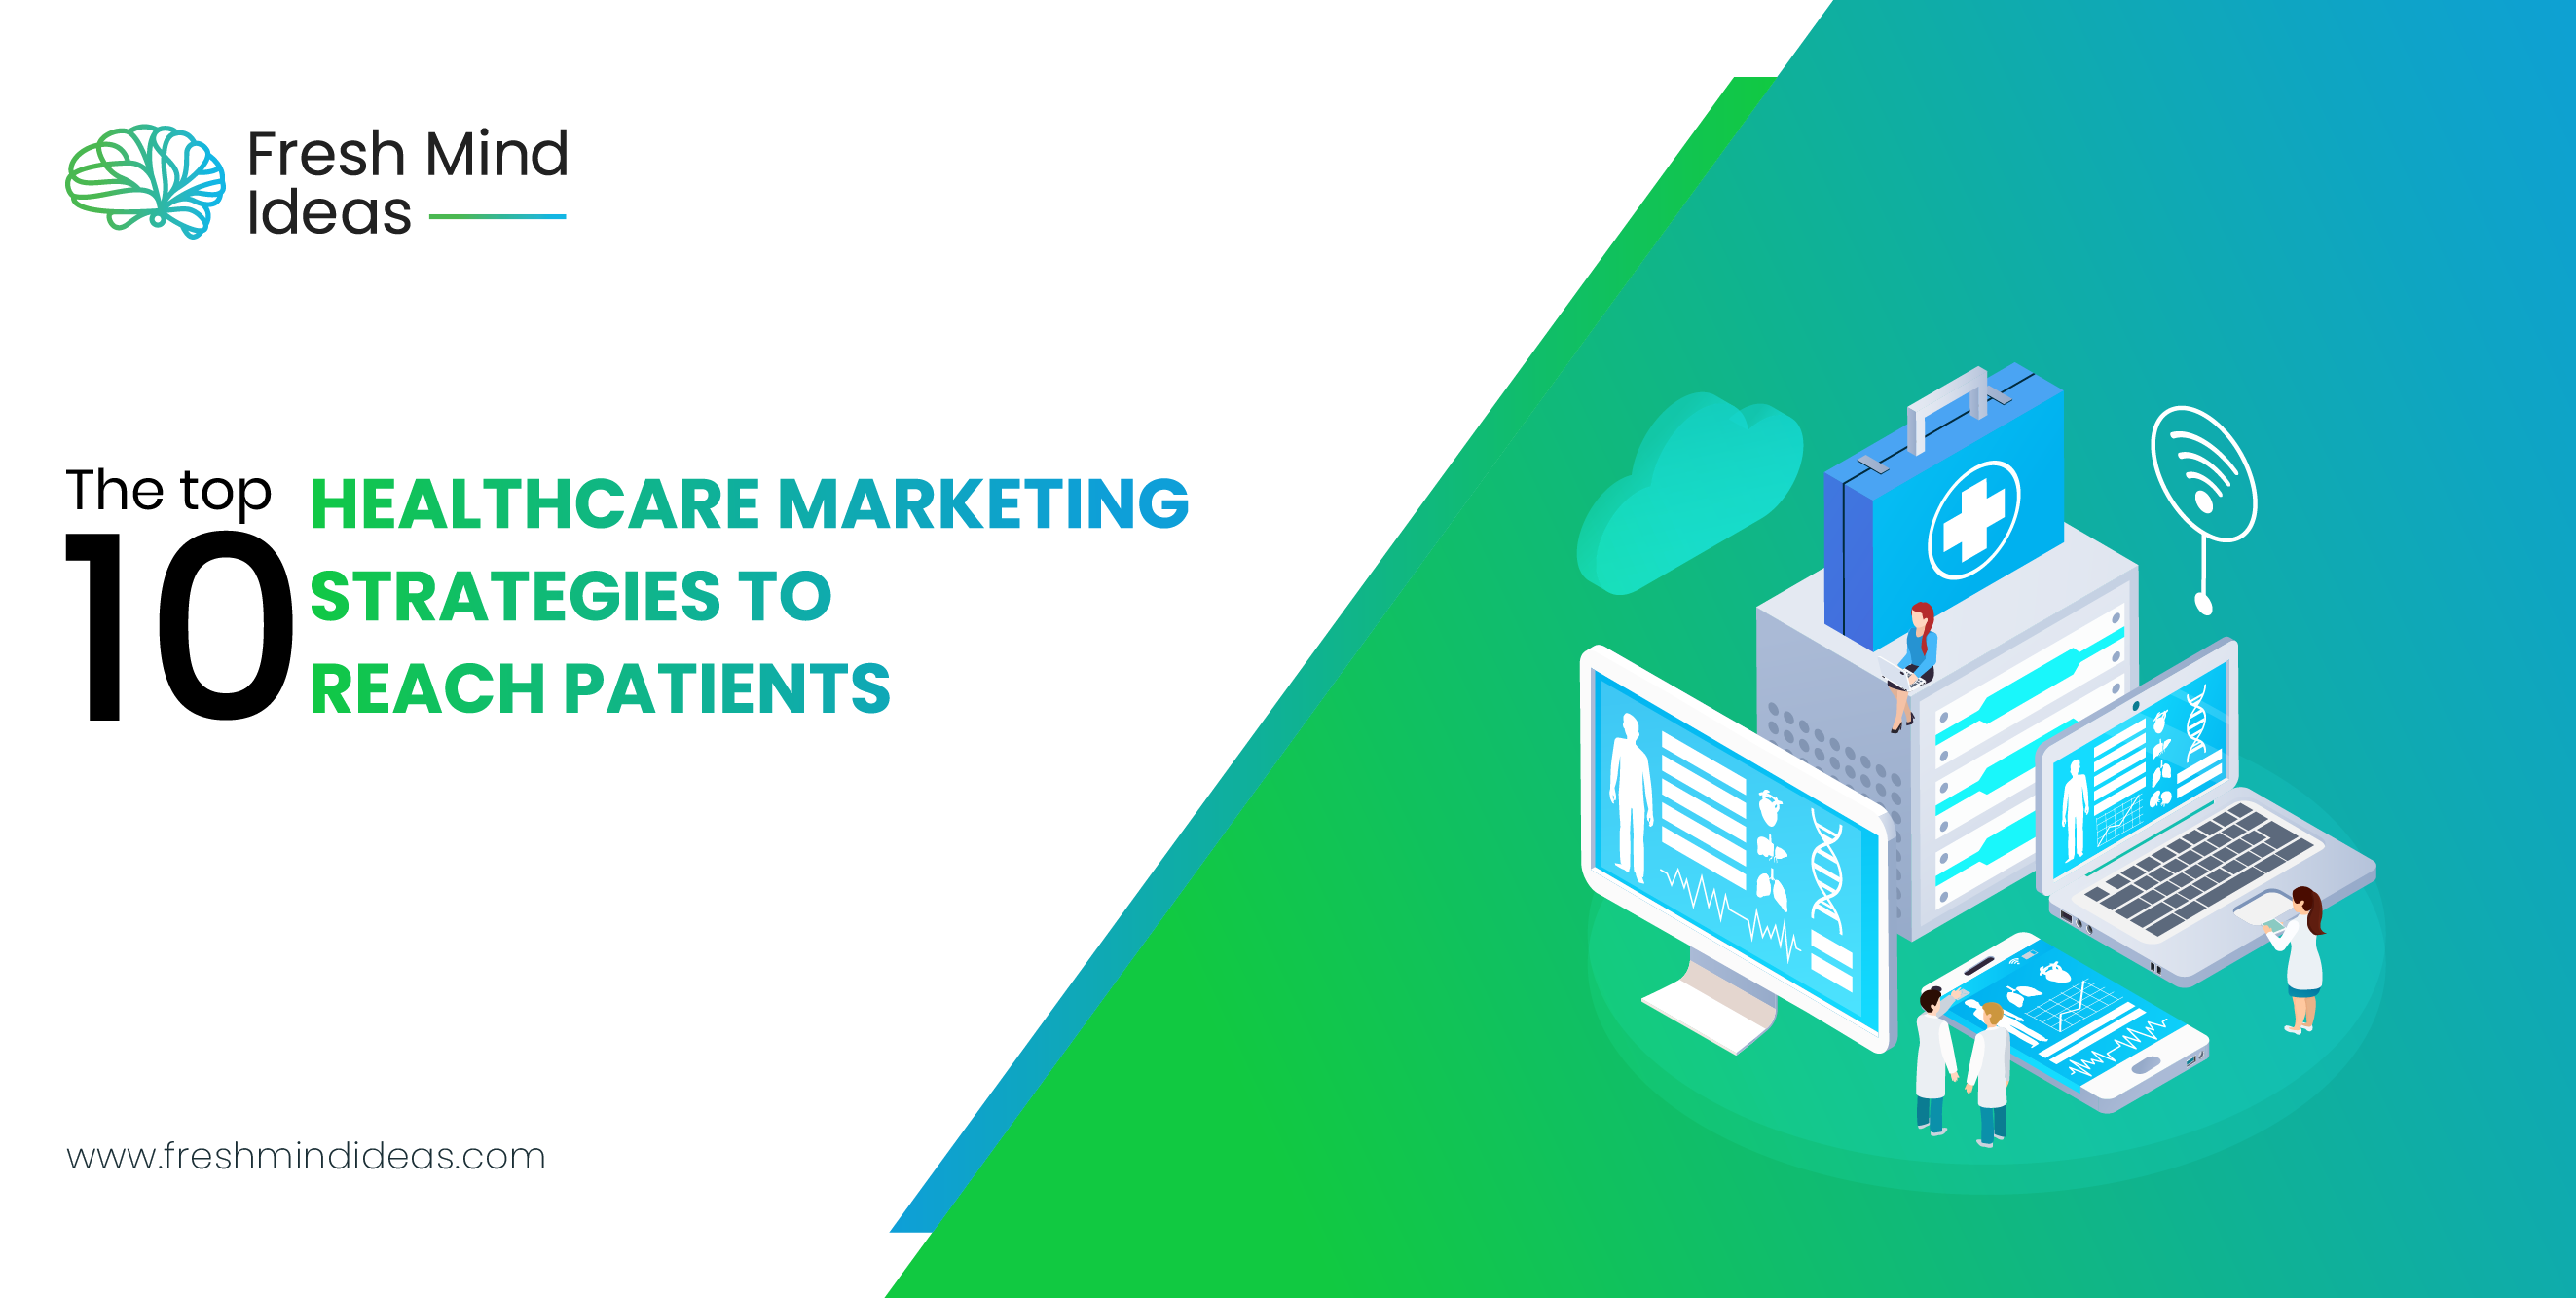 The top 10 healthcare marketing strategies to reach patients